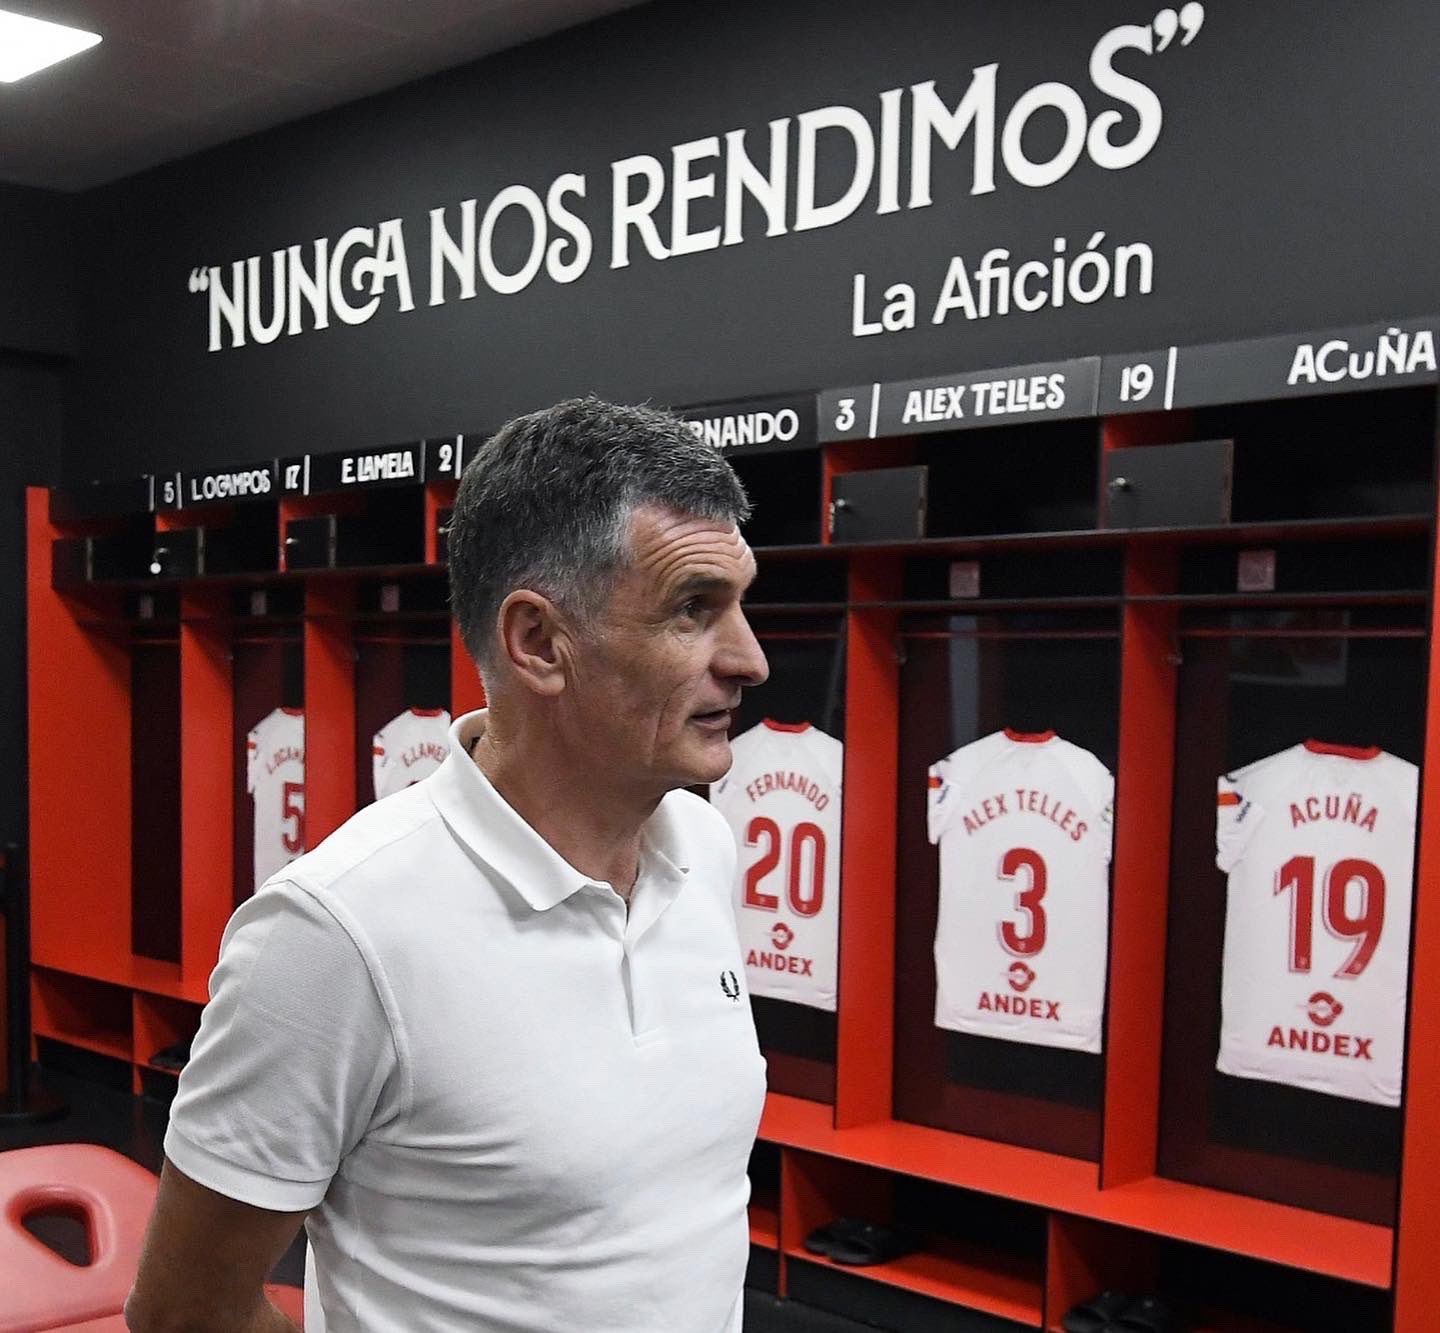 Jose Luis Mendilibar speaks as Sevilla manager – ‘We have to see with which foot we are limping’